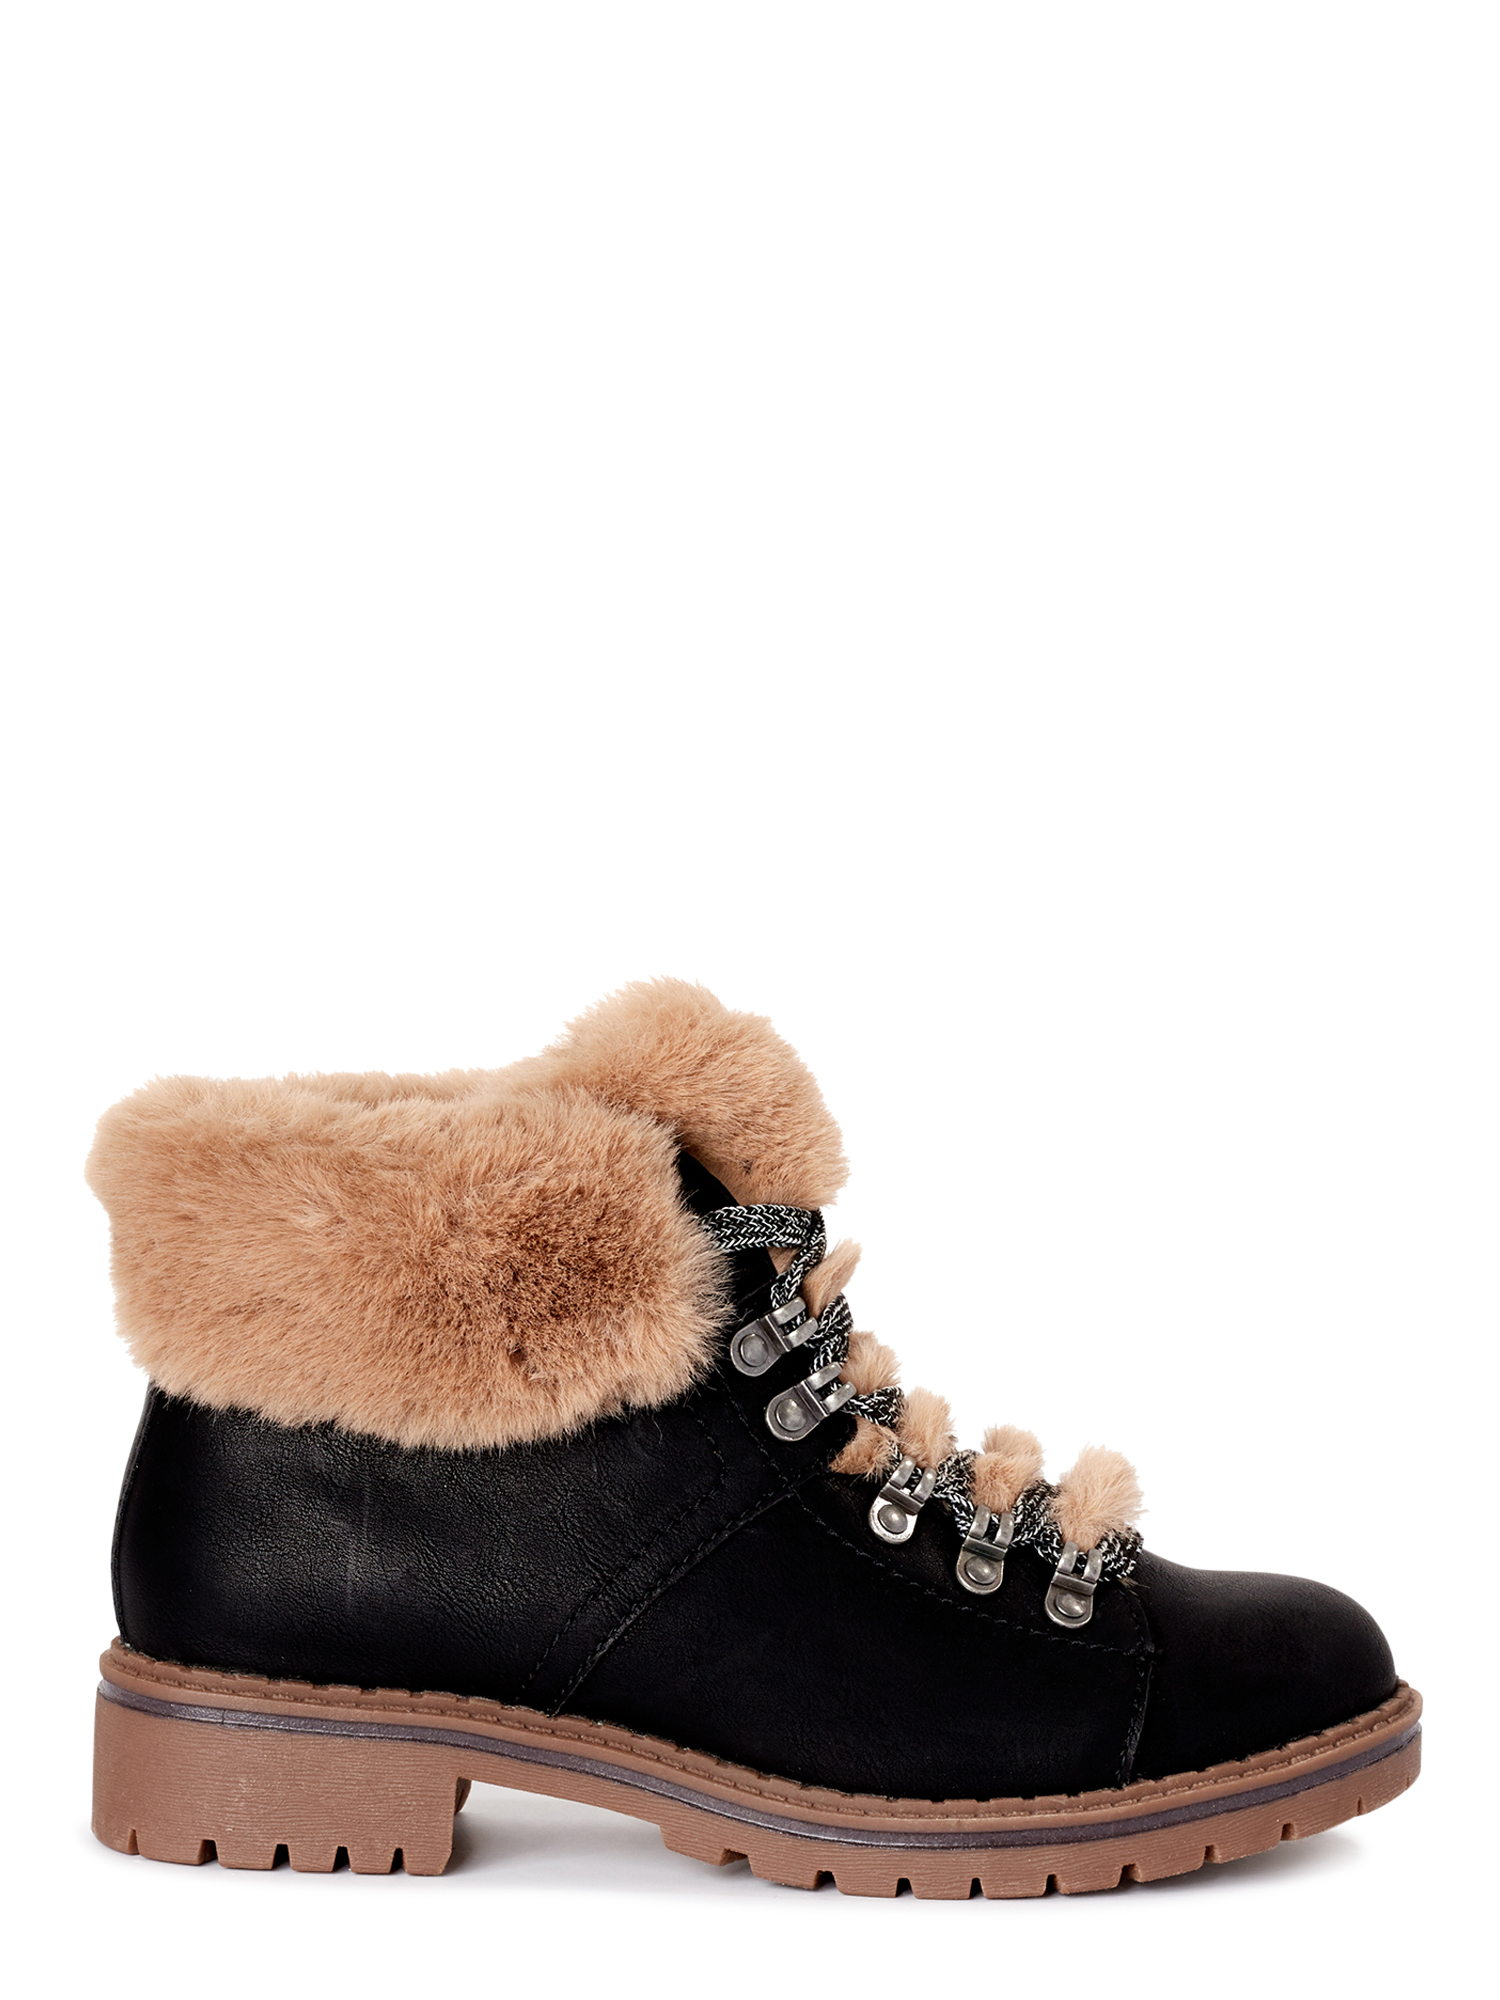 Time and Tru Women’s Faux Fur Hiker Boots - image 2 of 6